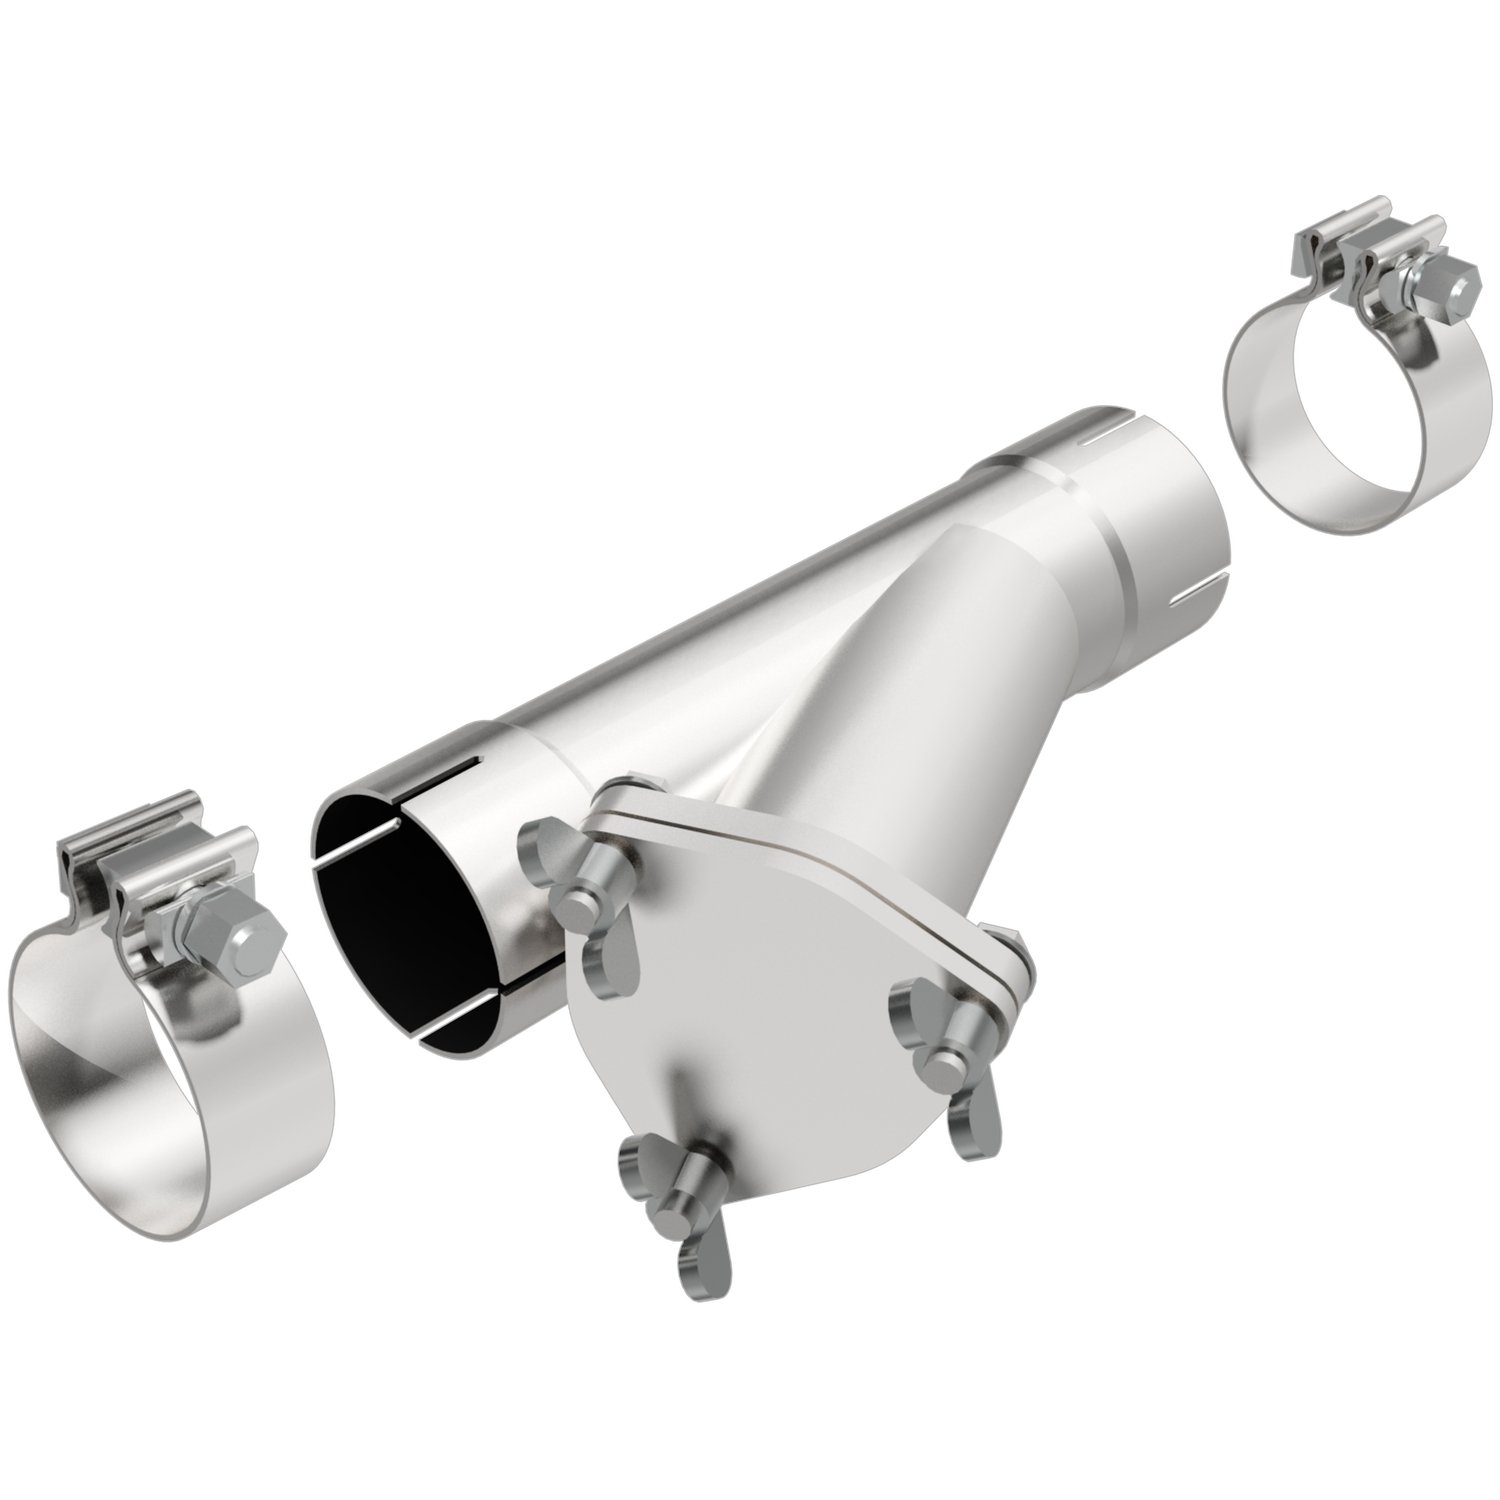 Stainless Steel Exhaust Cutout Outside Diameter: 2.5"